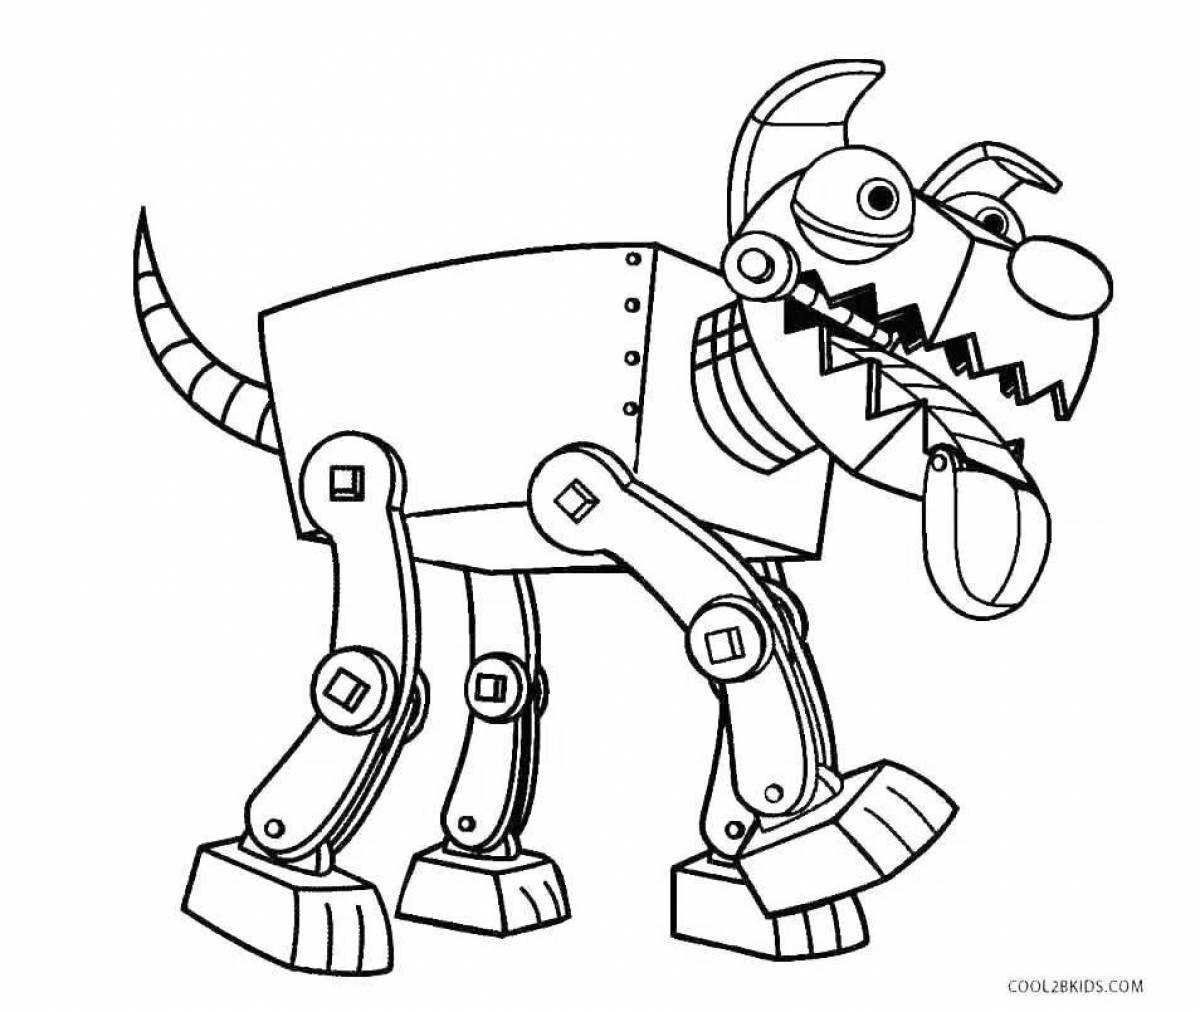 Gorgeous robot coloring book for kids